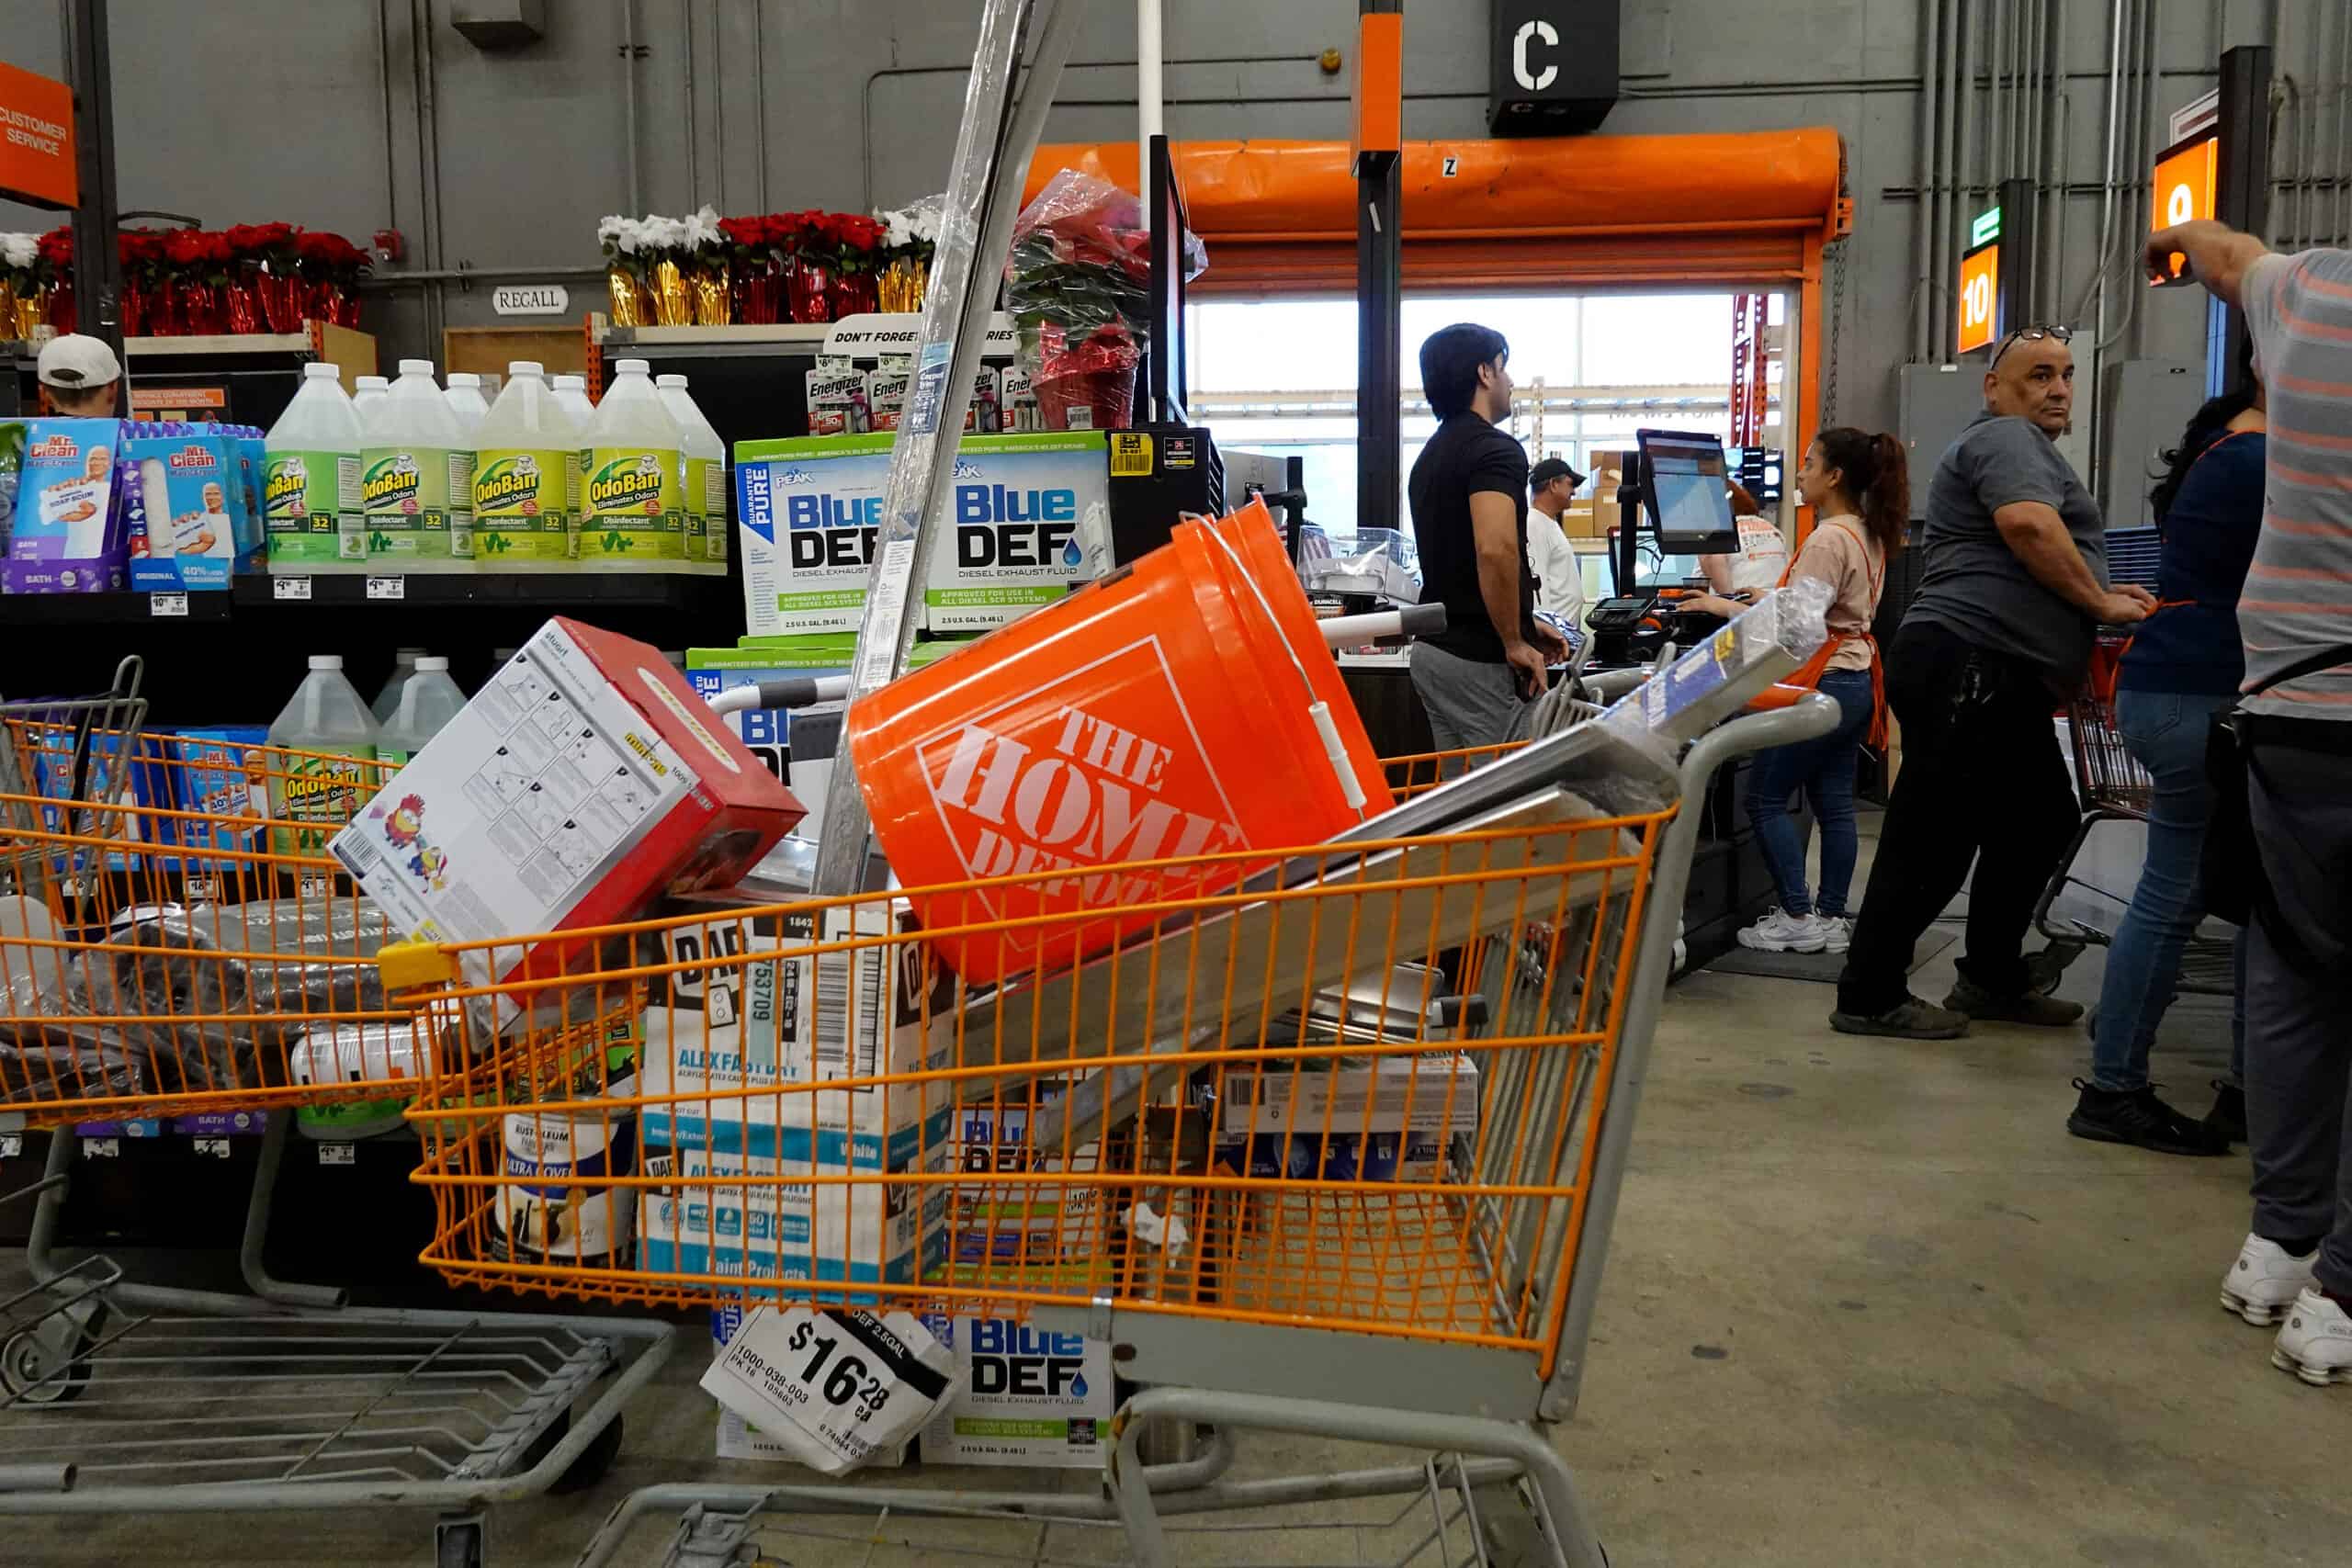 Home Depot Sales Slip, But Quarterly Earnings Still Beat Expectations